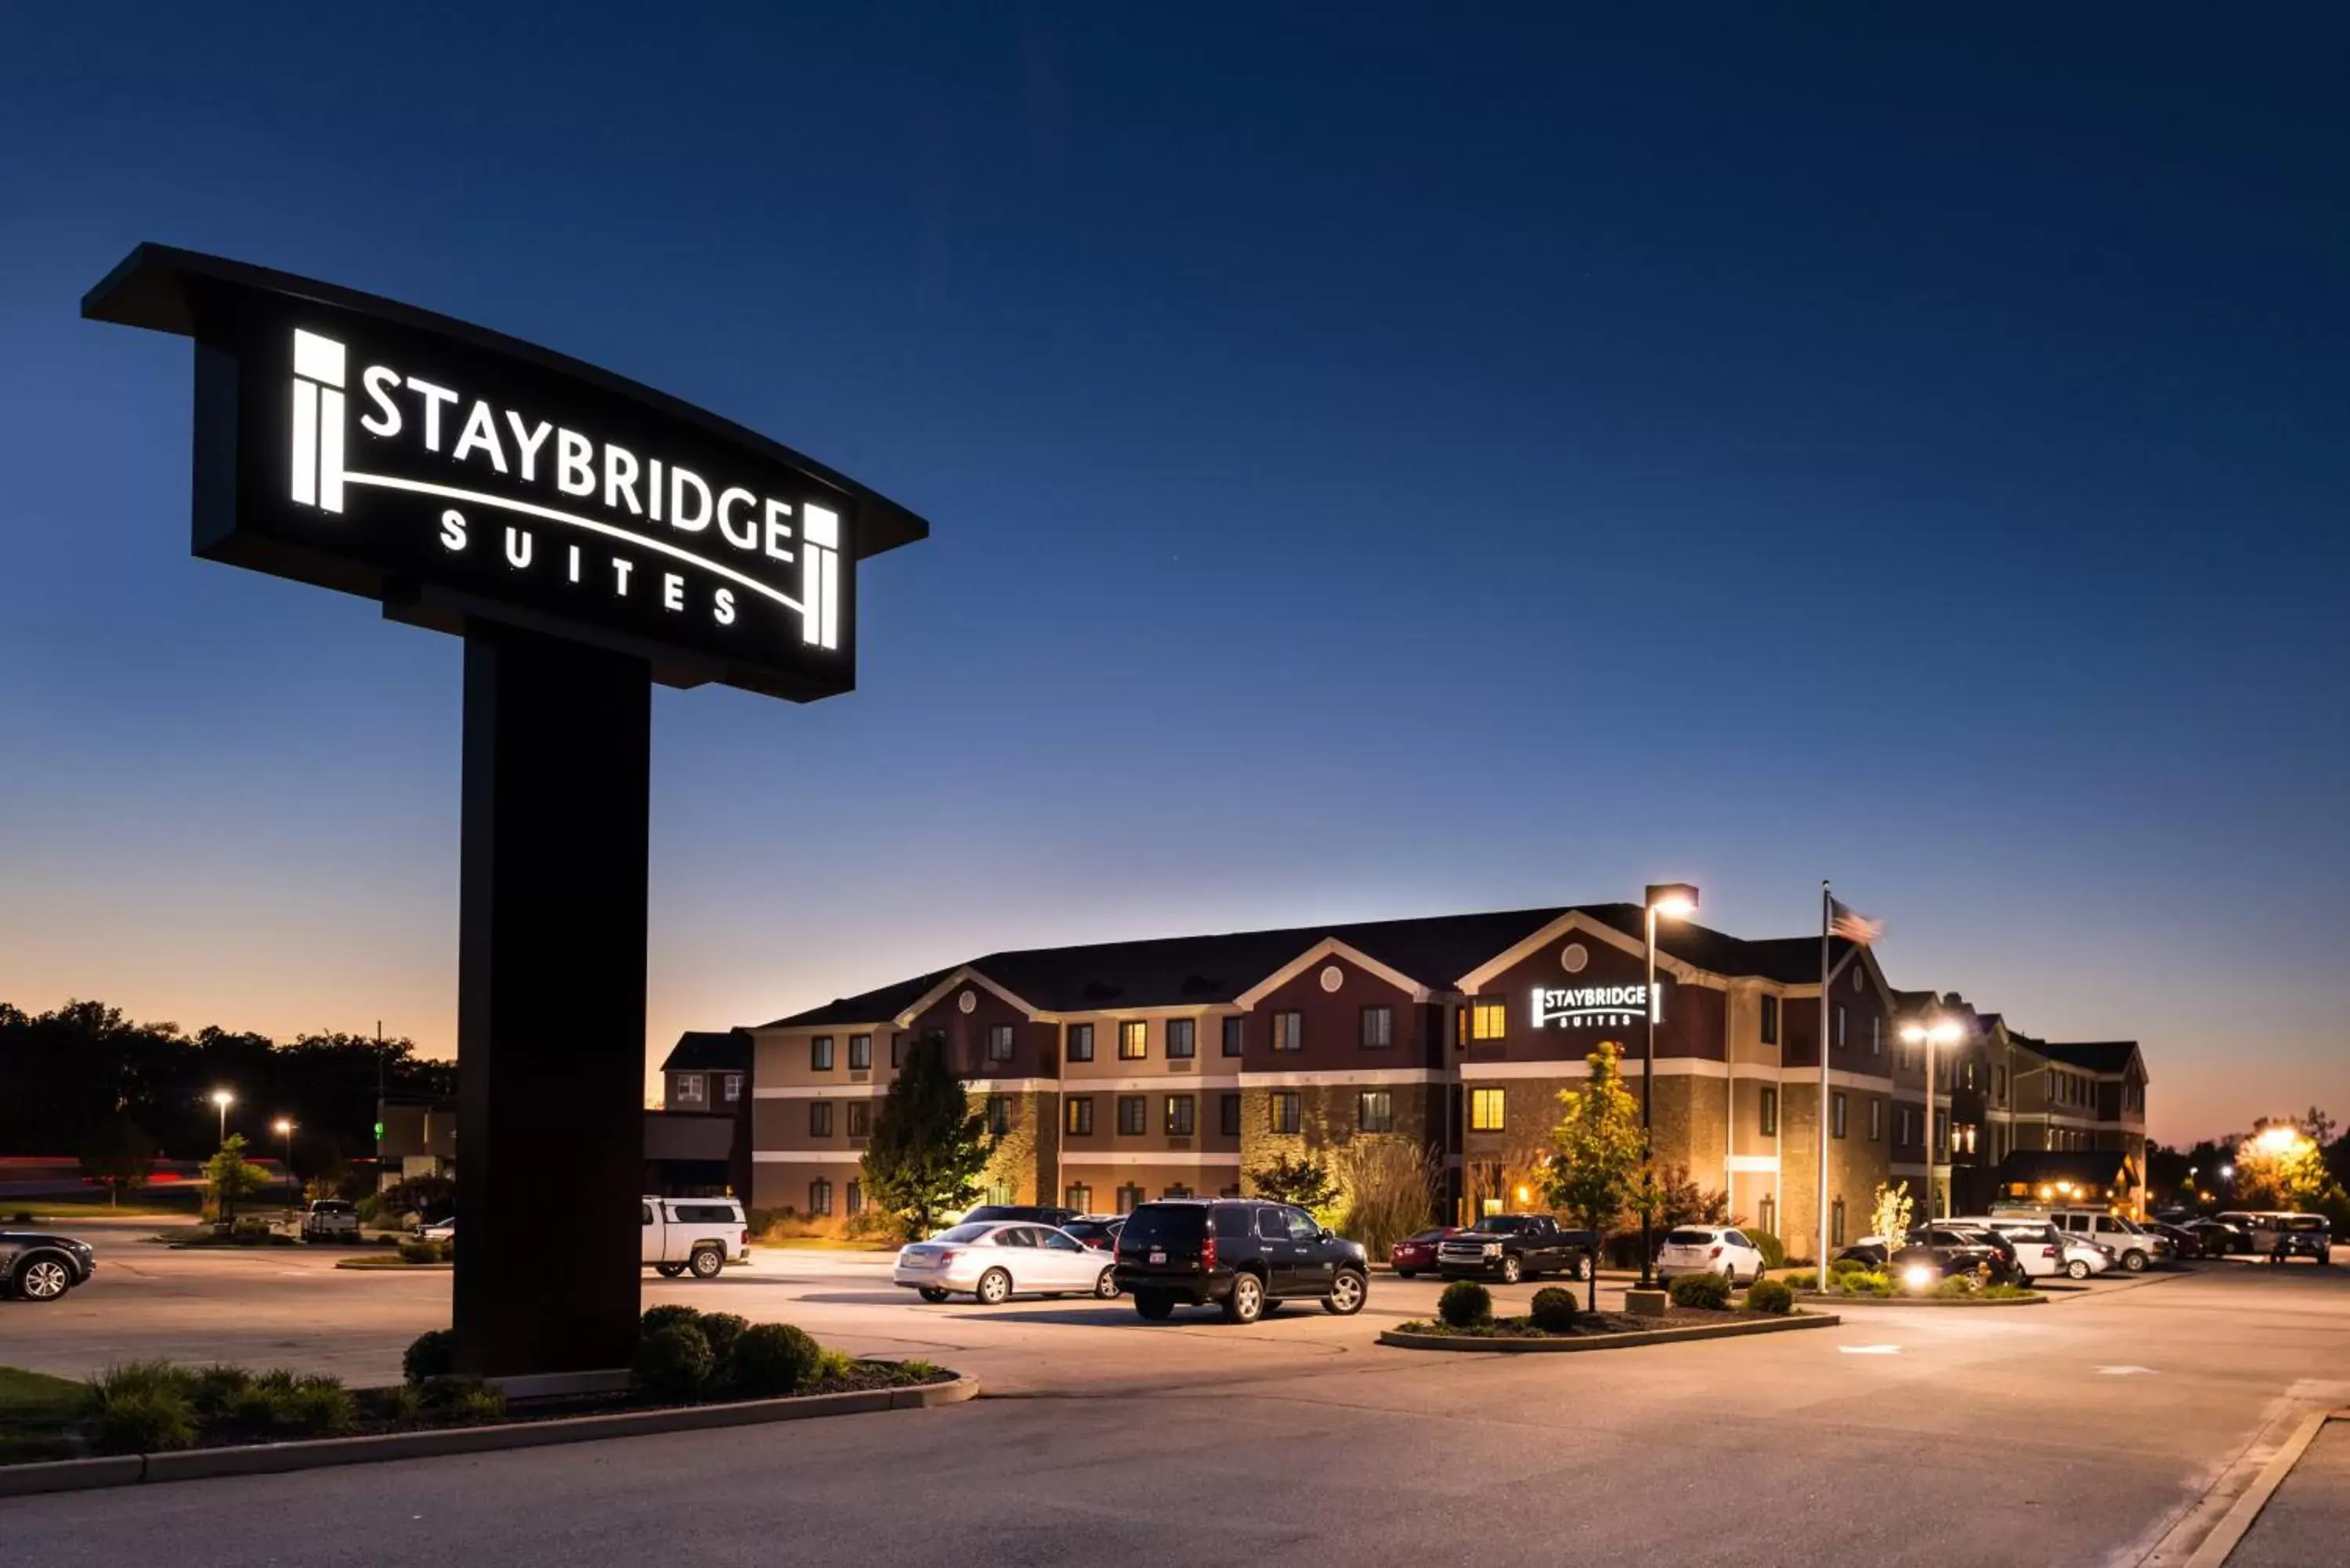 Property building in Staybridge Suites O'Fallon Chesterfield, an IHG Hotel